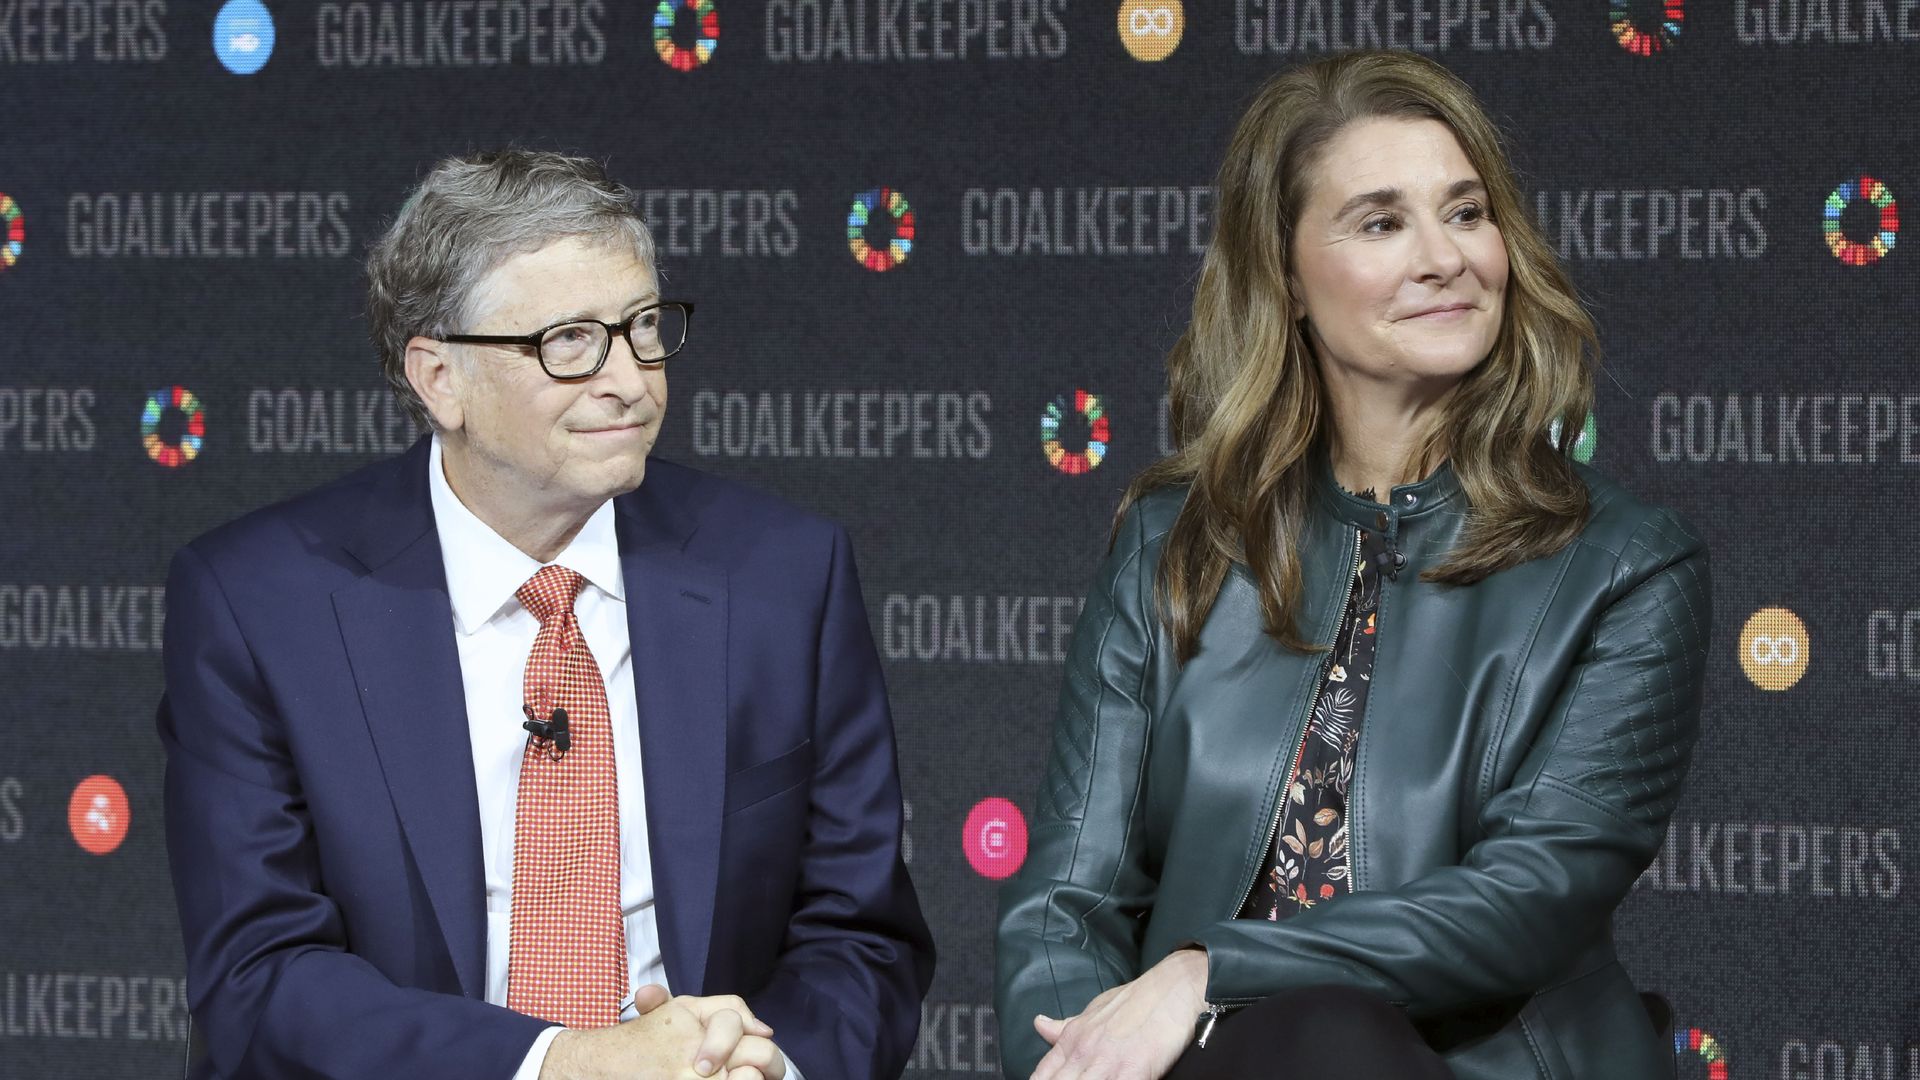 Bill and Melinda Gates at a Goalkeepers event